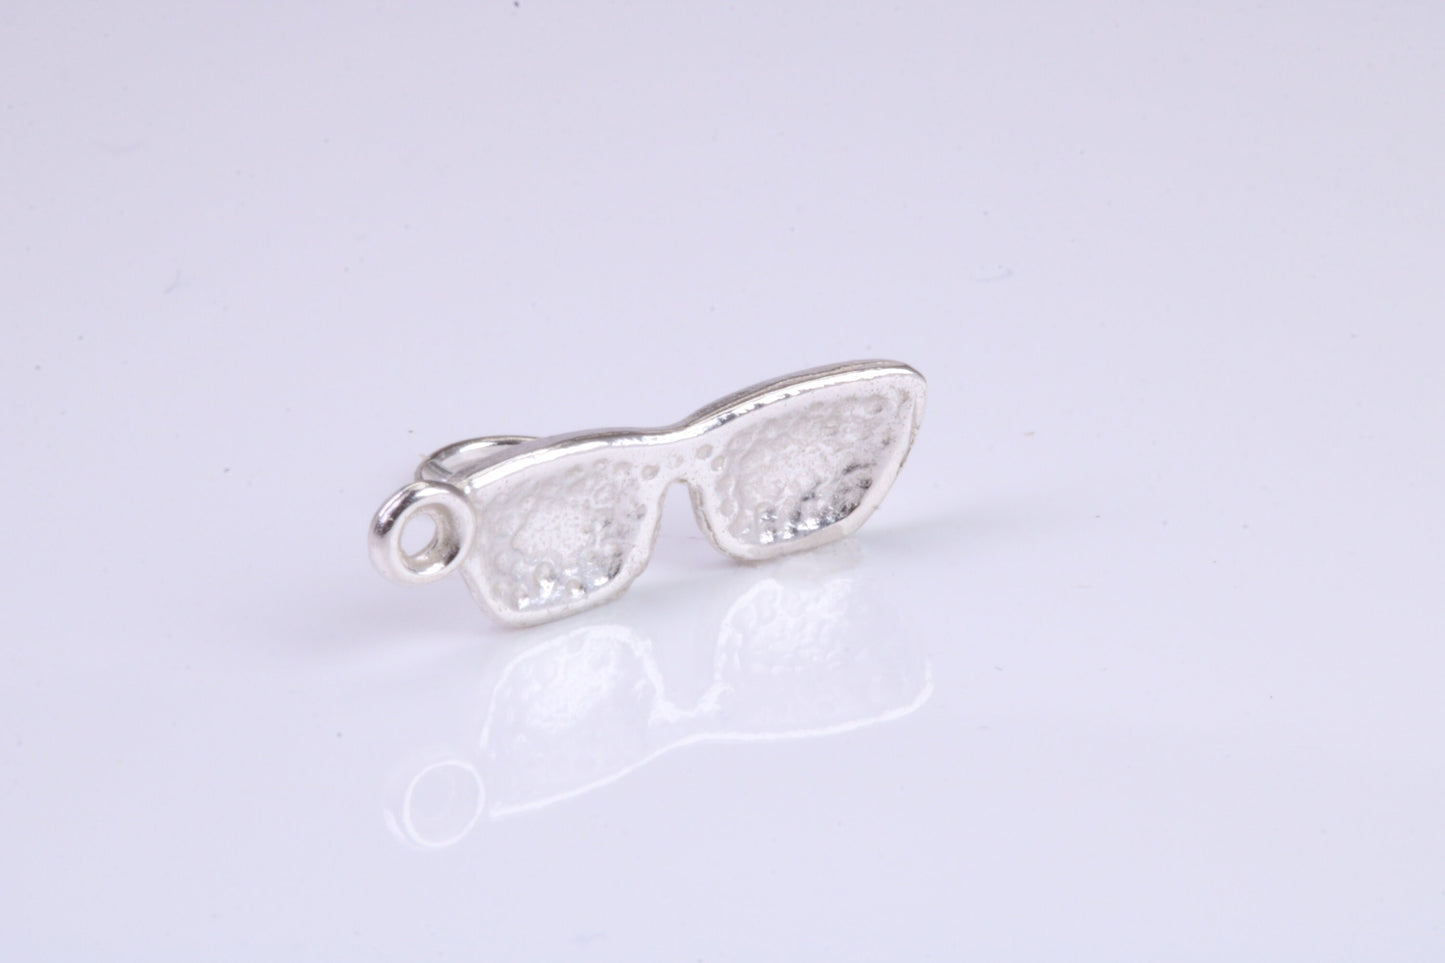 Sunglasses Charm, Traditional Charm, Made from Solid 925 Grade Sterling Silver, Complete with Attachment Link